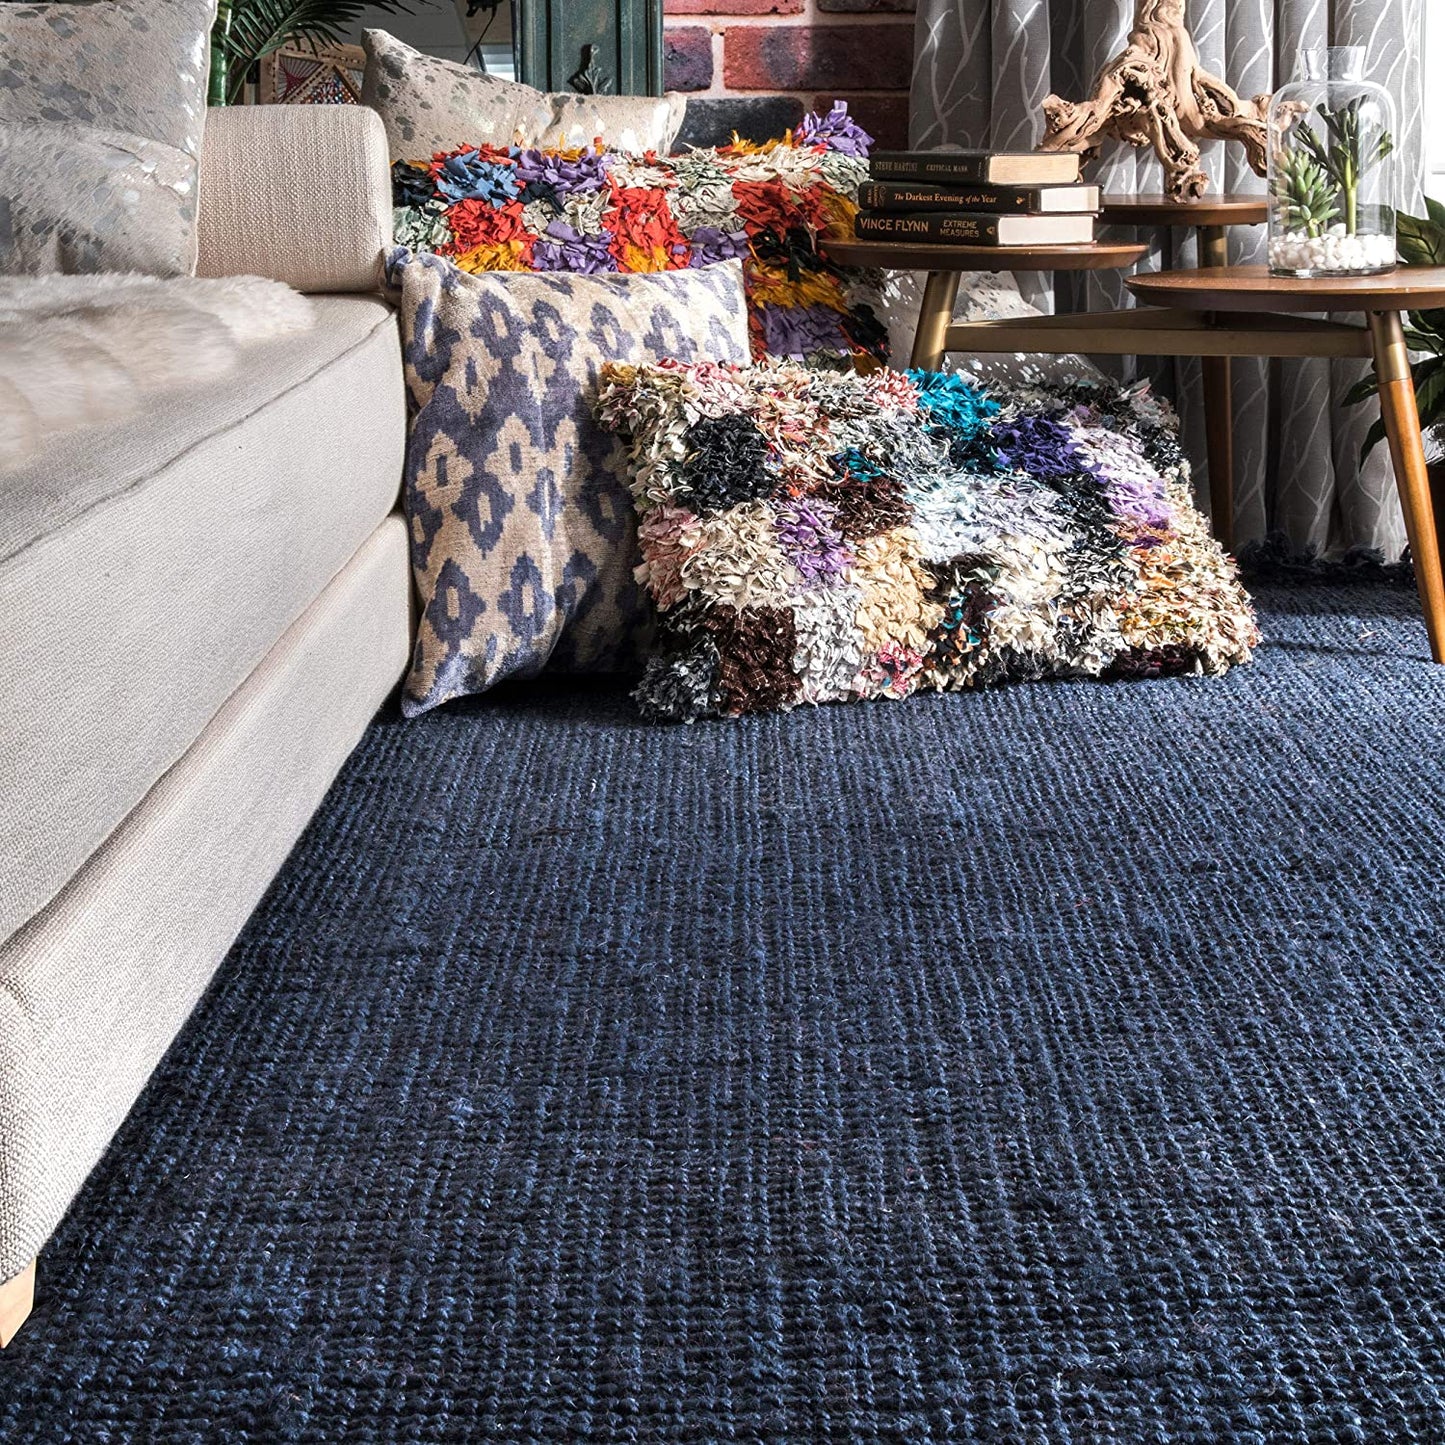 Chunky Loop Navy Blue Jute Rug - Multiple sizes available